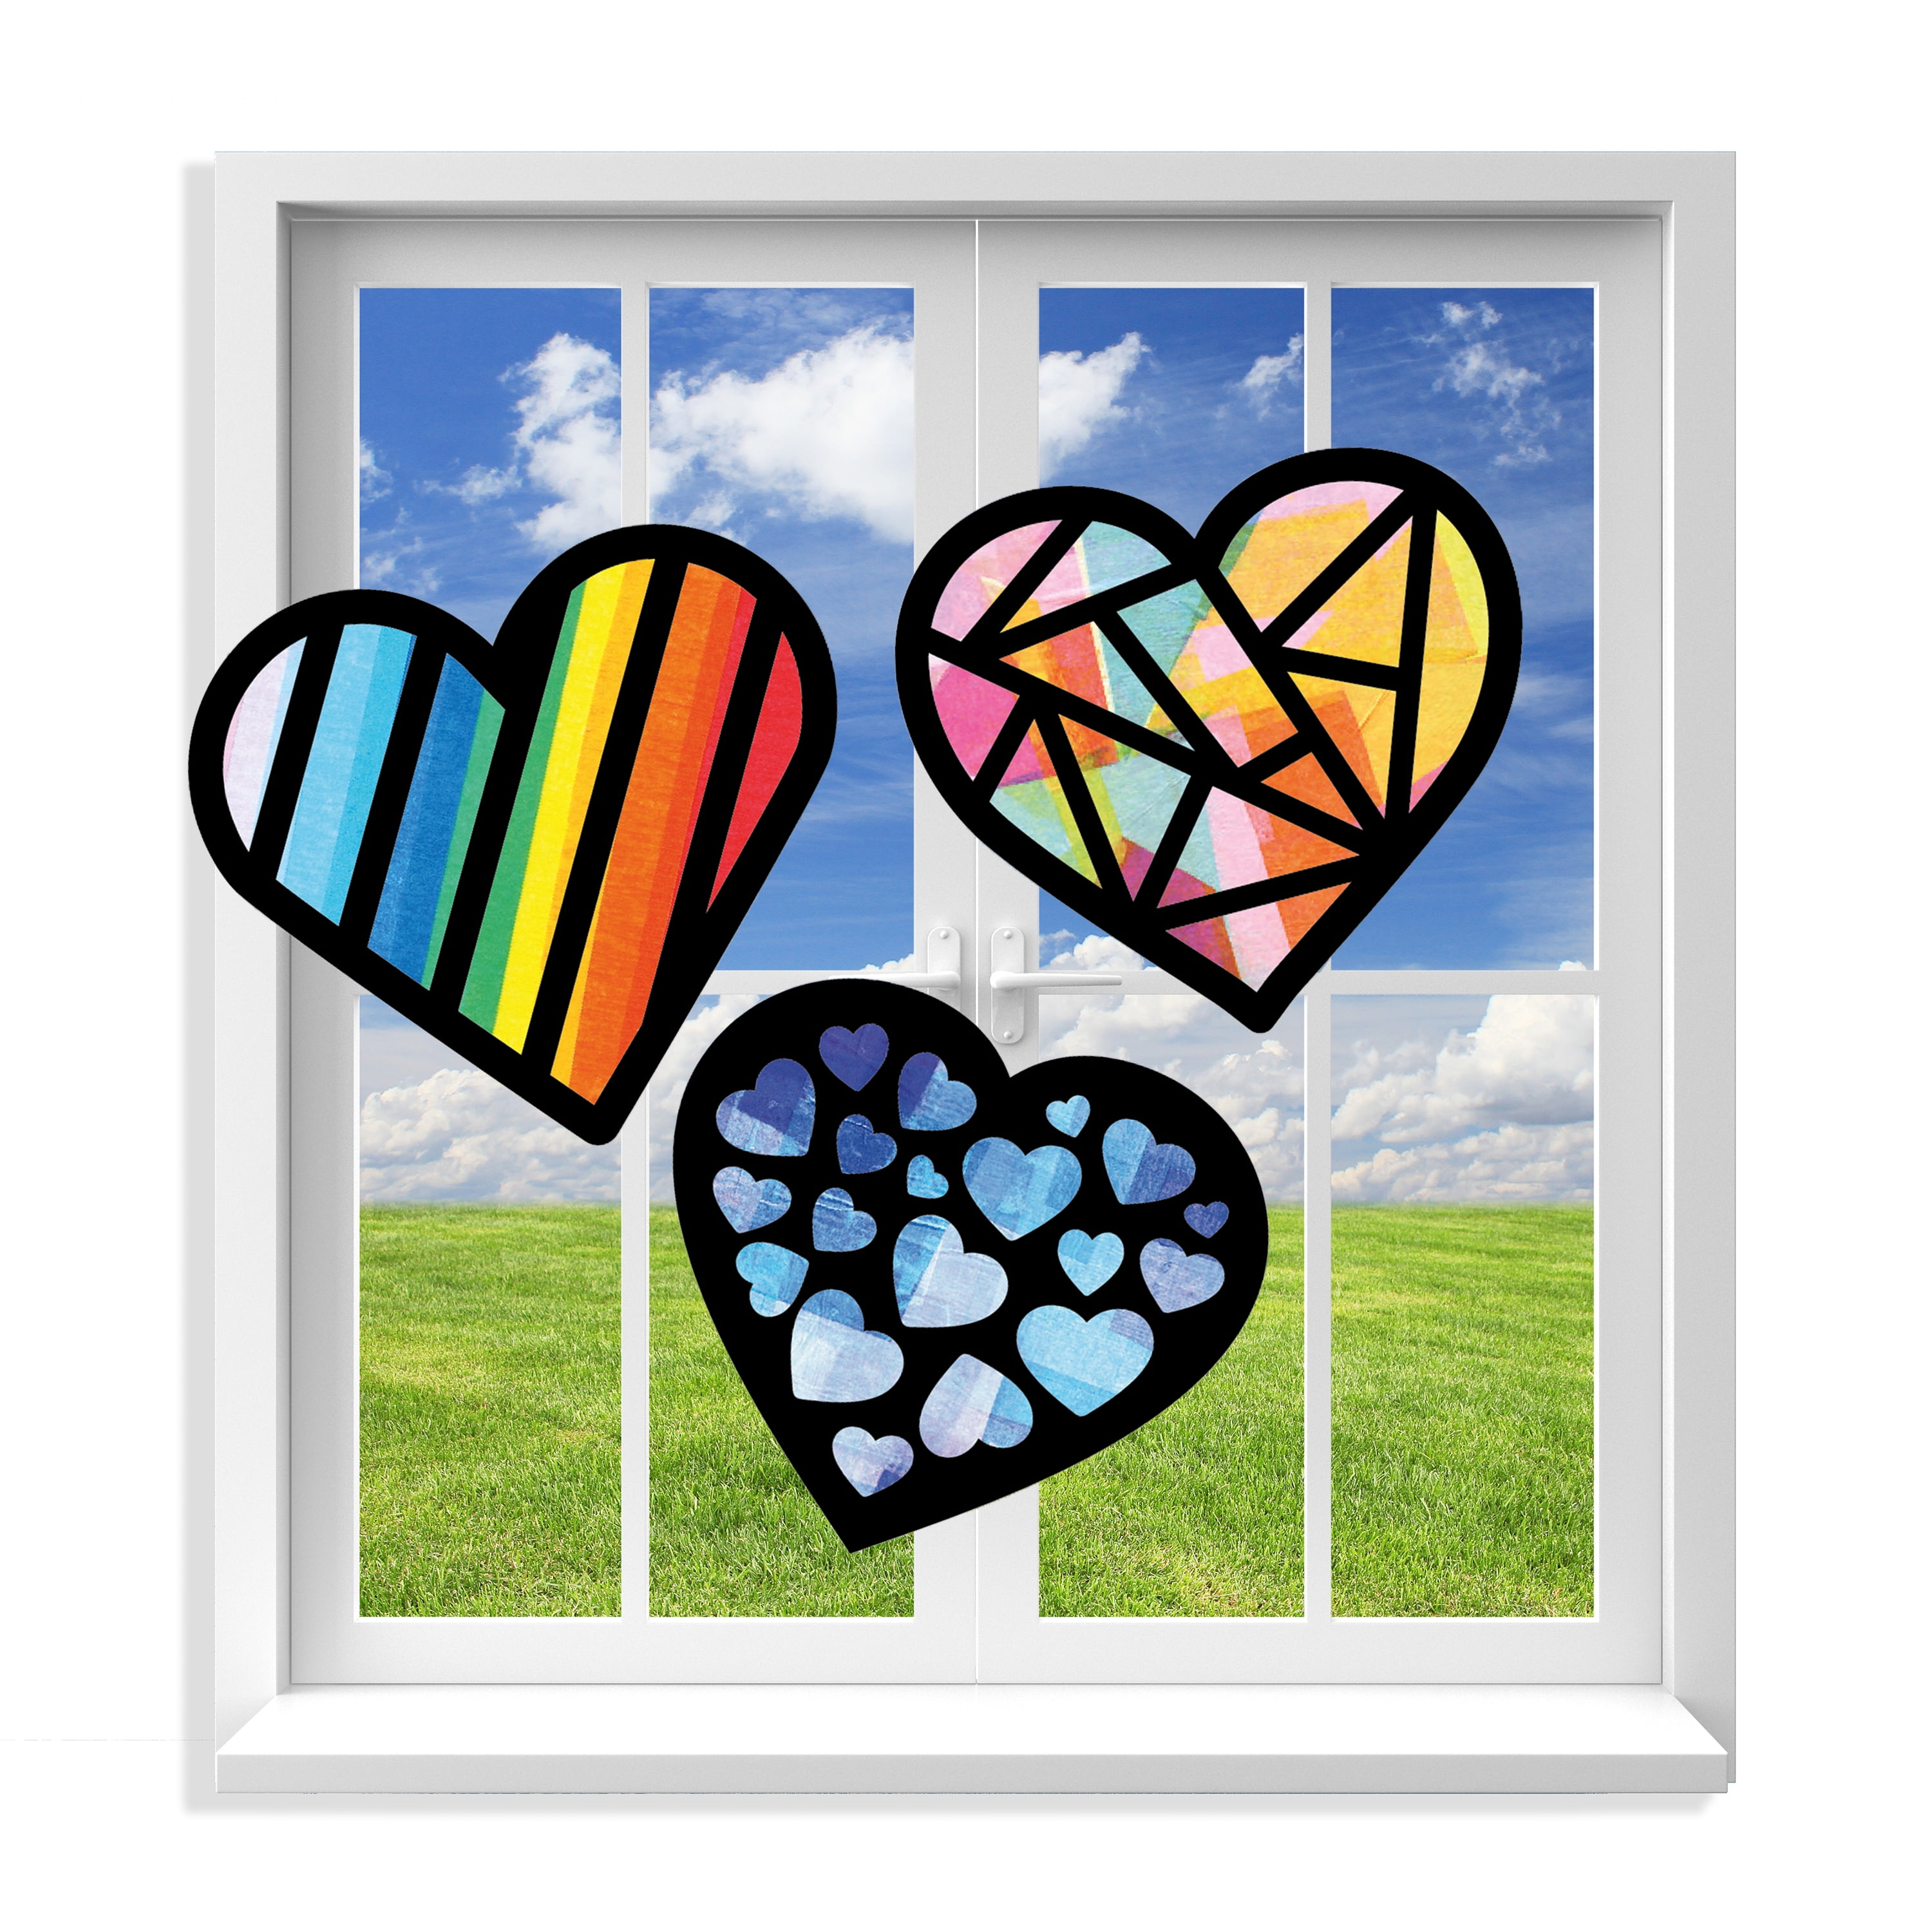  18 Pieces Heart Paper Suncatcher Kits for Kids Valentine's Day  Heart Shape Suncatcher Craft and Window Stained Glass Effect Paper Art  Contact Paper for DIY Valentine's Day Party Supplies